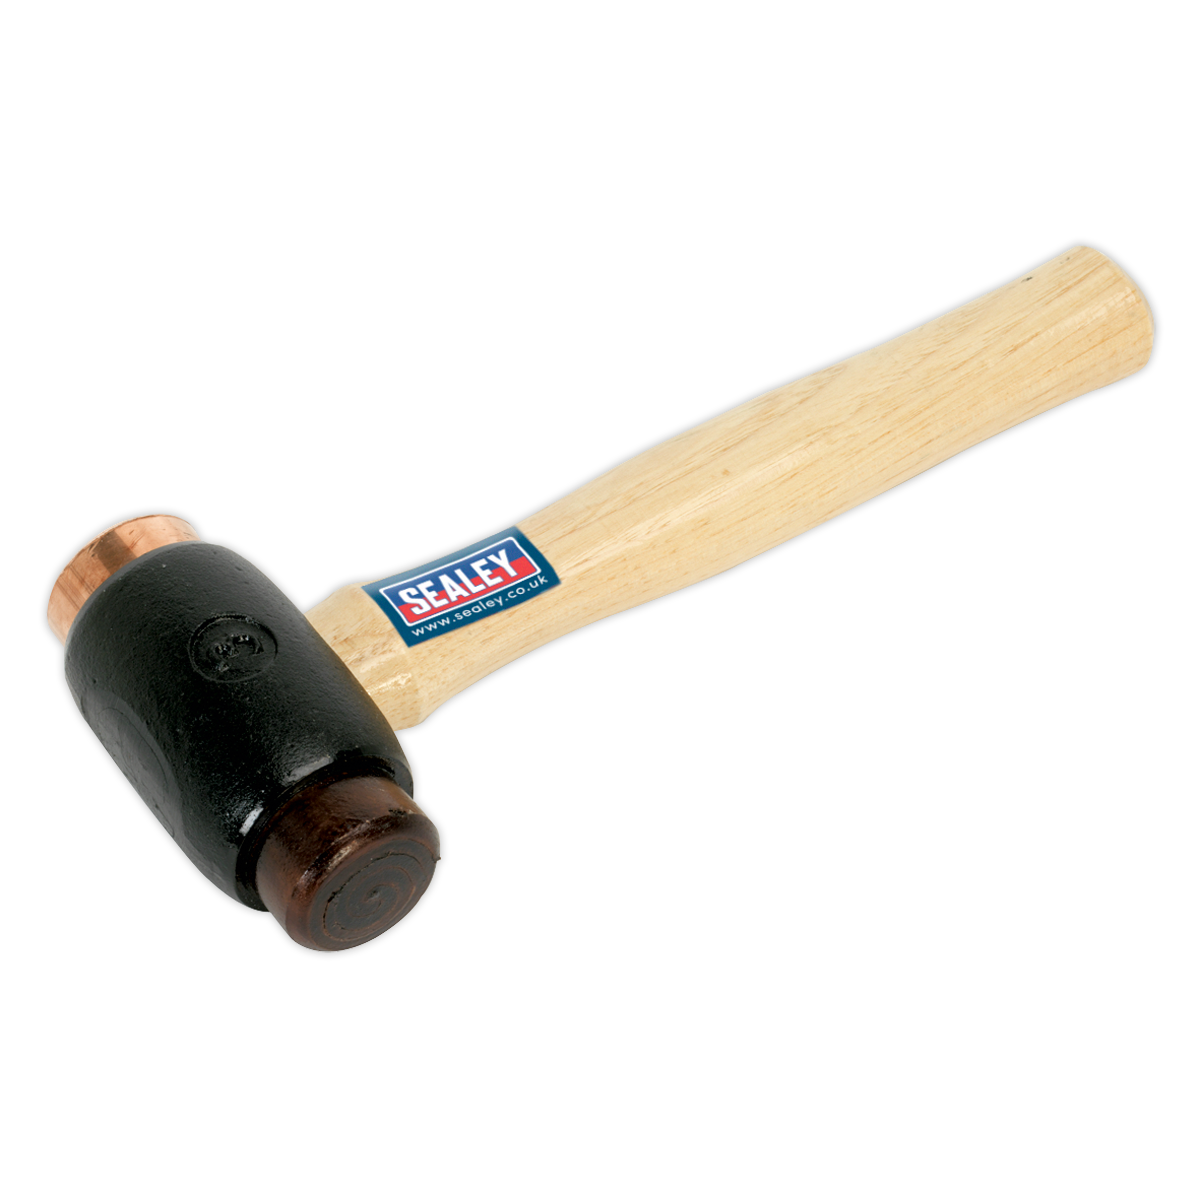 Copper/Rawhide Faced Hammer 3.5lb Hickory Shaft - CRF35 - Farming Parts